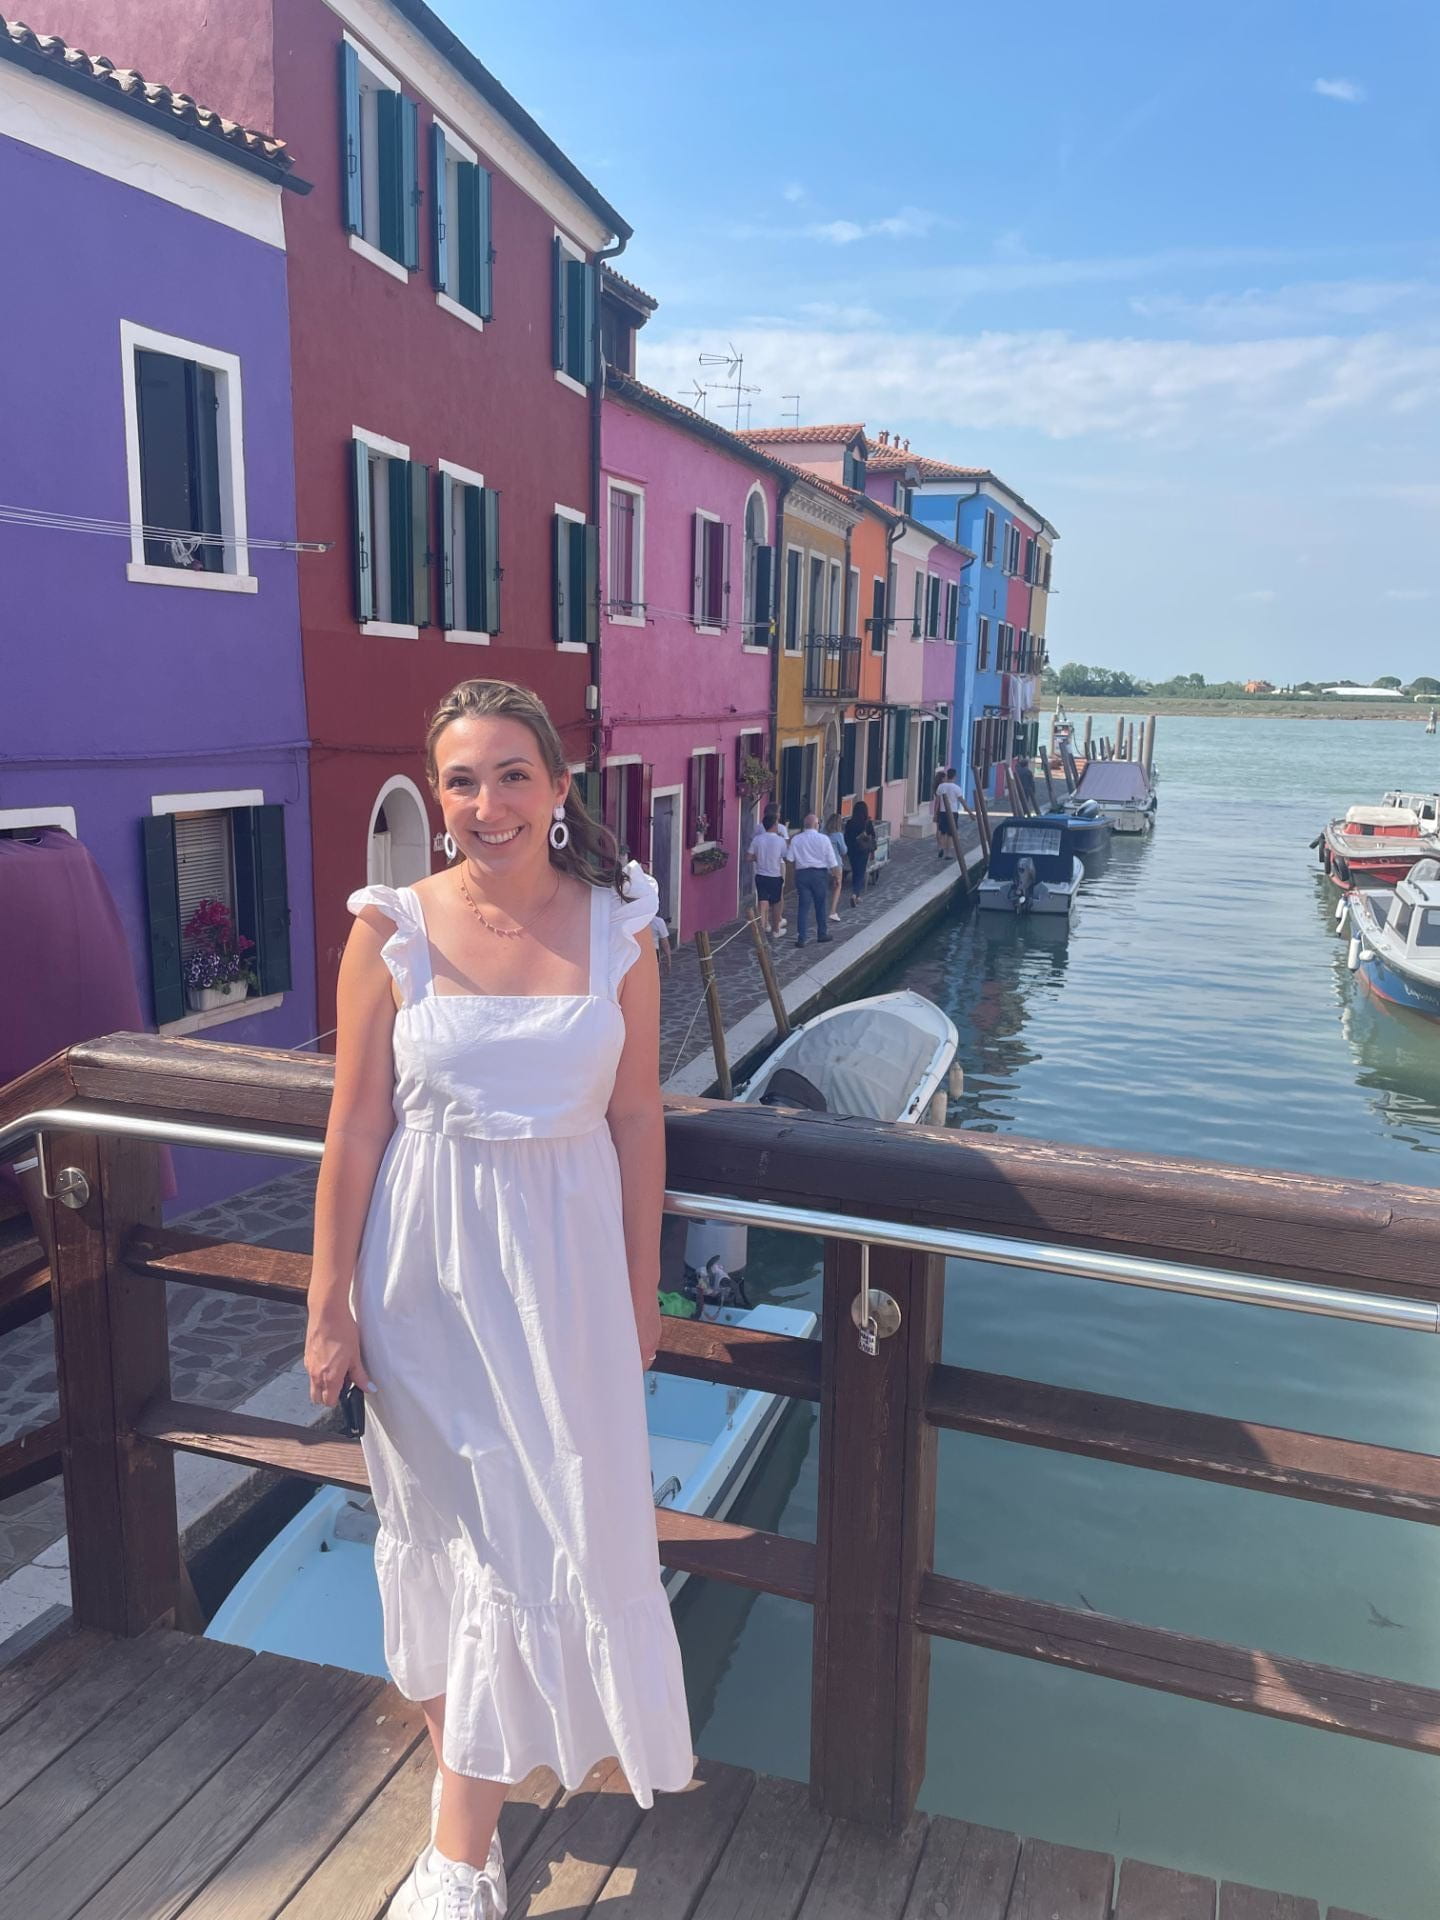 Marion Krueger, Evening MBA '25 poses in front of colorful houses lining a lake. 